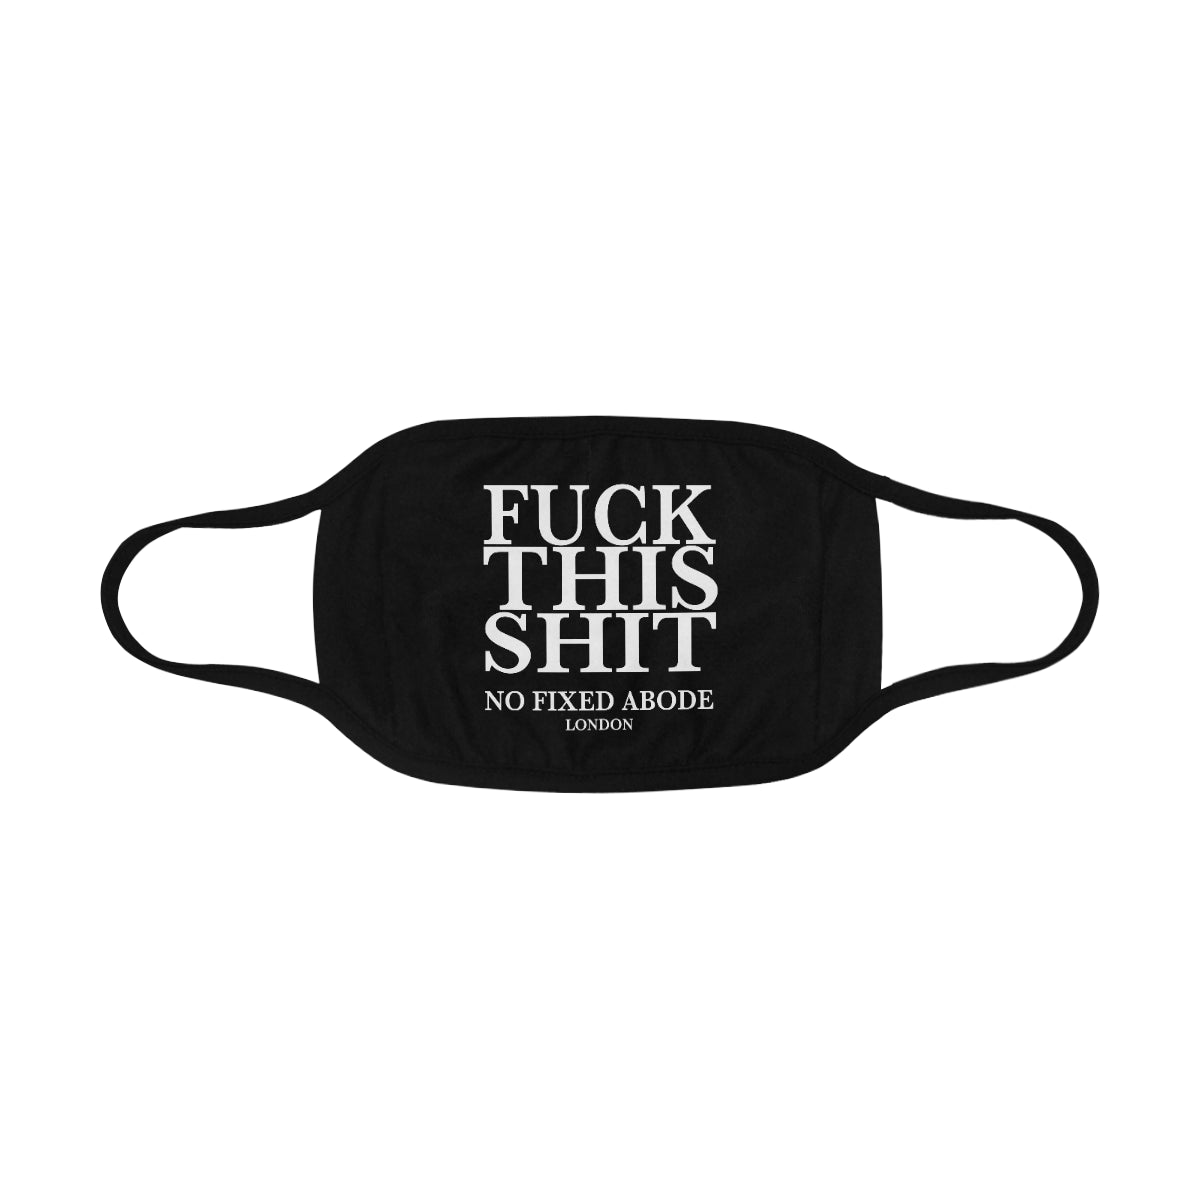 Fuck This Shit Mouth Face Mask Streetwear Youth Mens Womens Covid no fixed abode